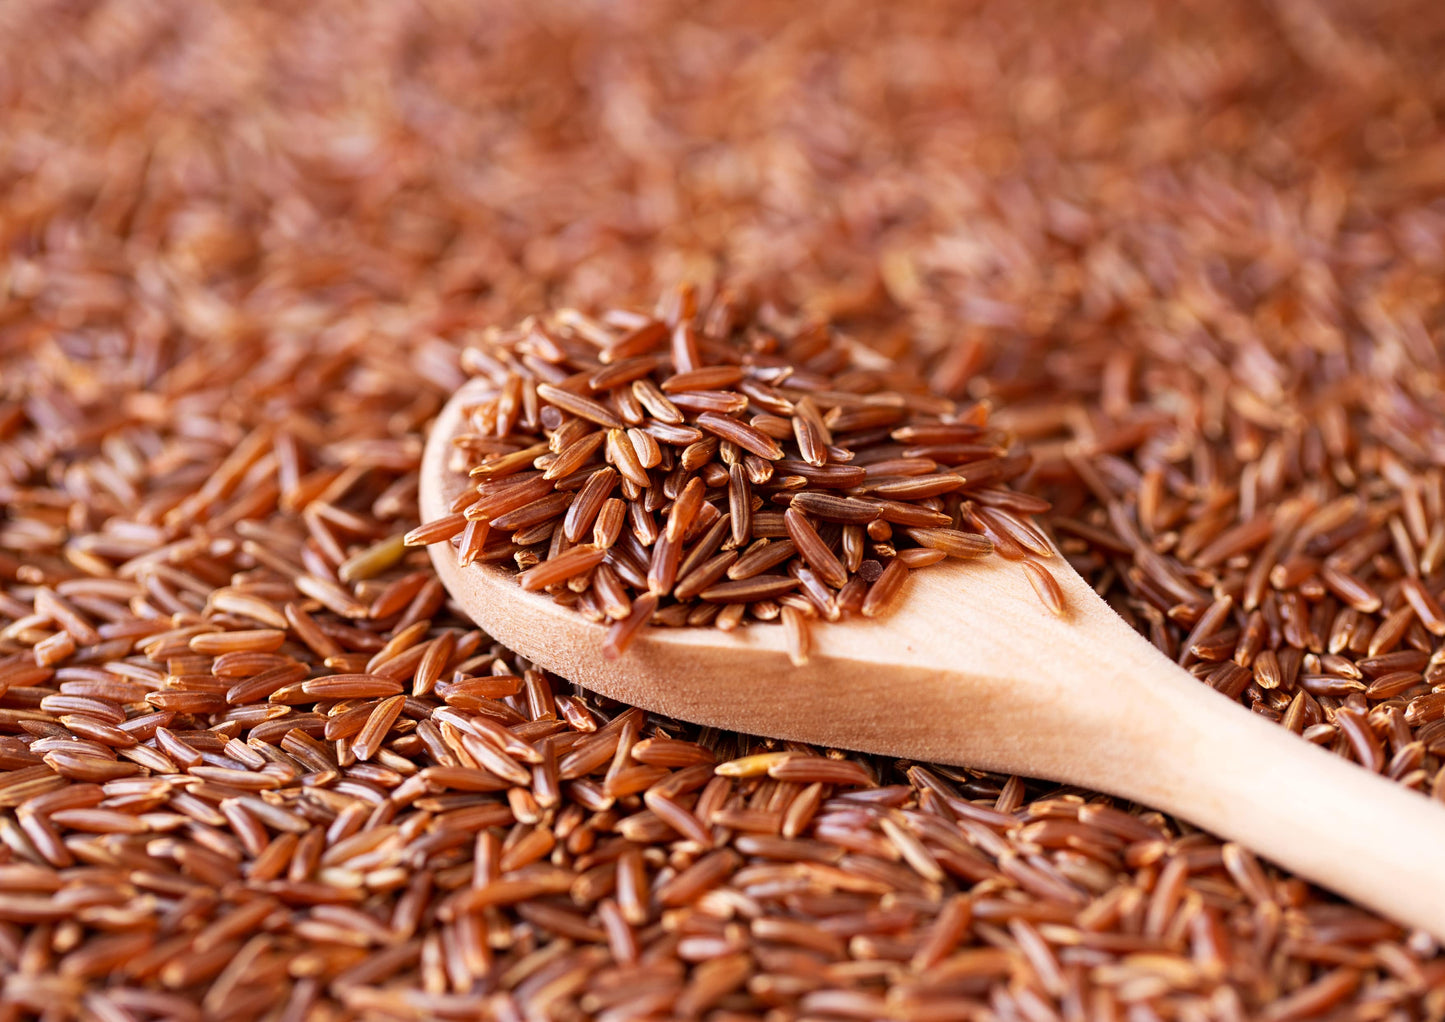 Red Rice - Whole Long-Grain Rice, Nutty Flavor, Soft Texture, Non-Sticky, Vegan, Bulk. Good Source of Protein and Antioxidants. Perfect for Pilafs, Salads, Stir-Fries, and Rice Bowls